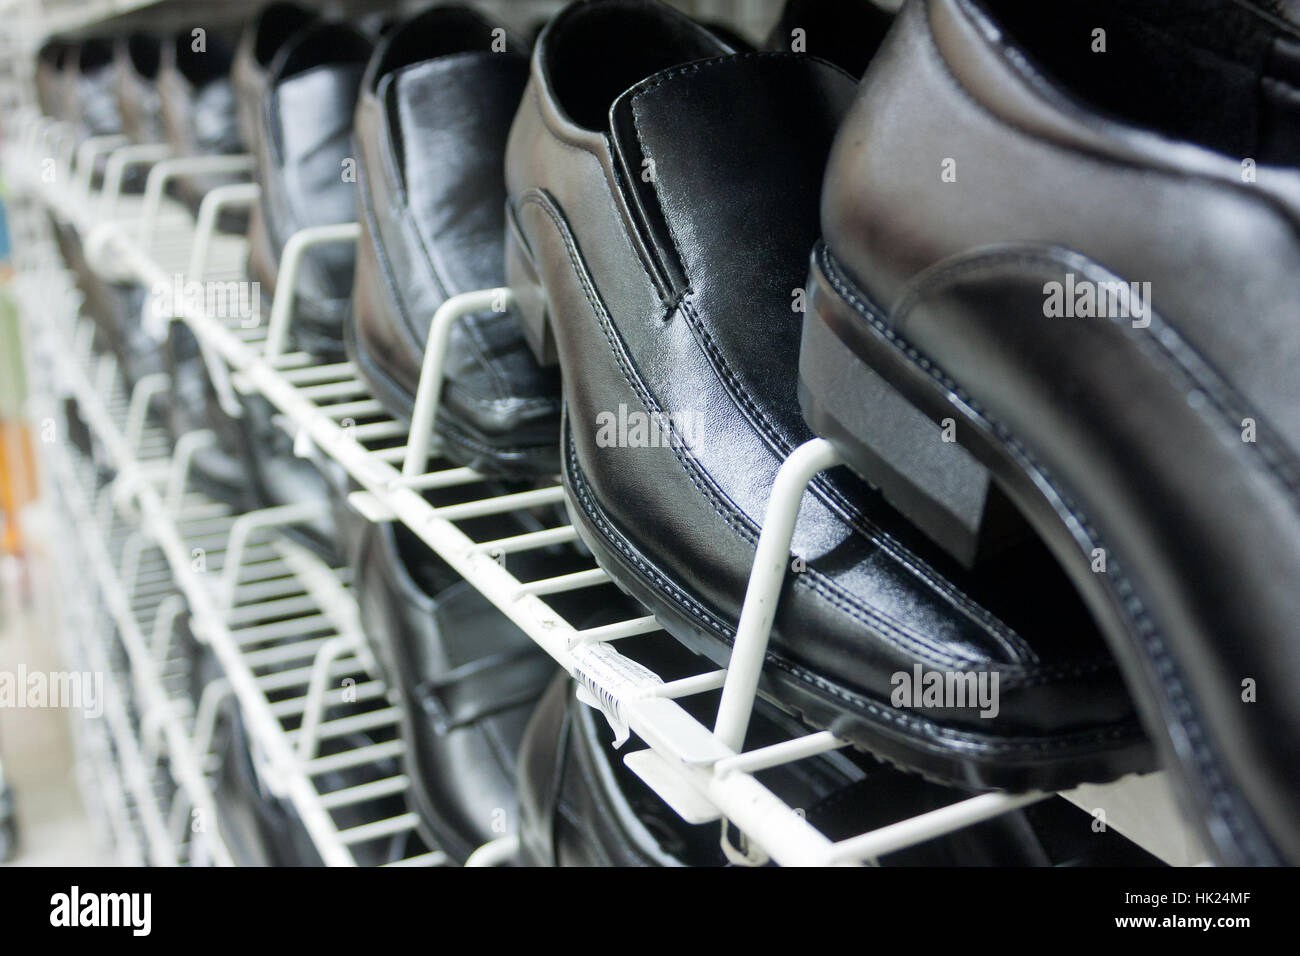 Black Leather Shoes On Shelves In Perspective View Stock Photo